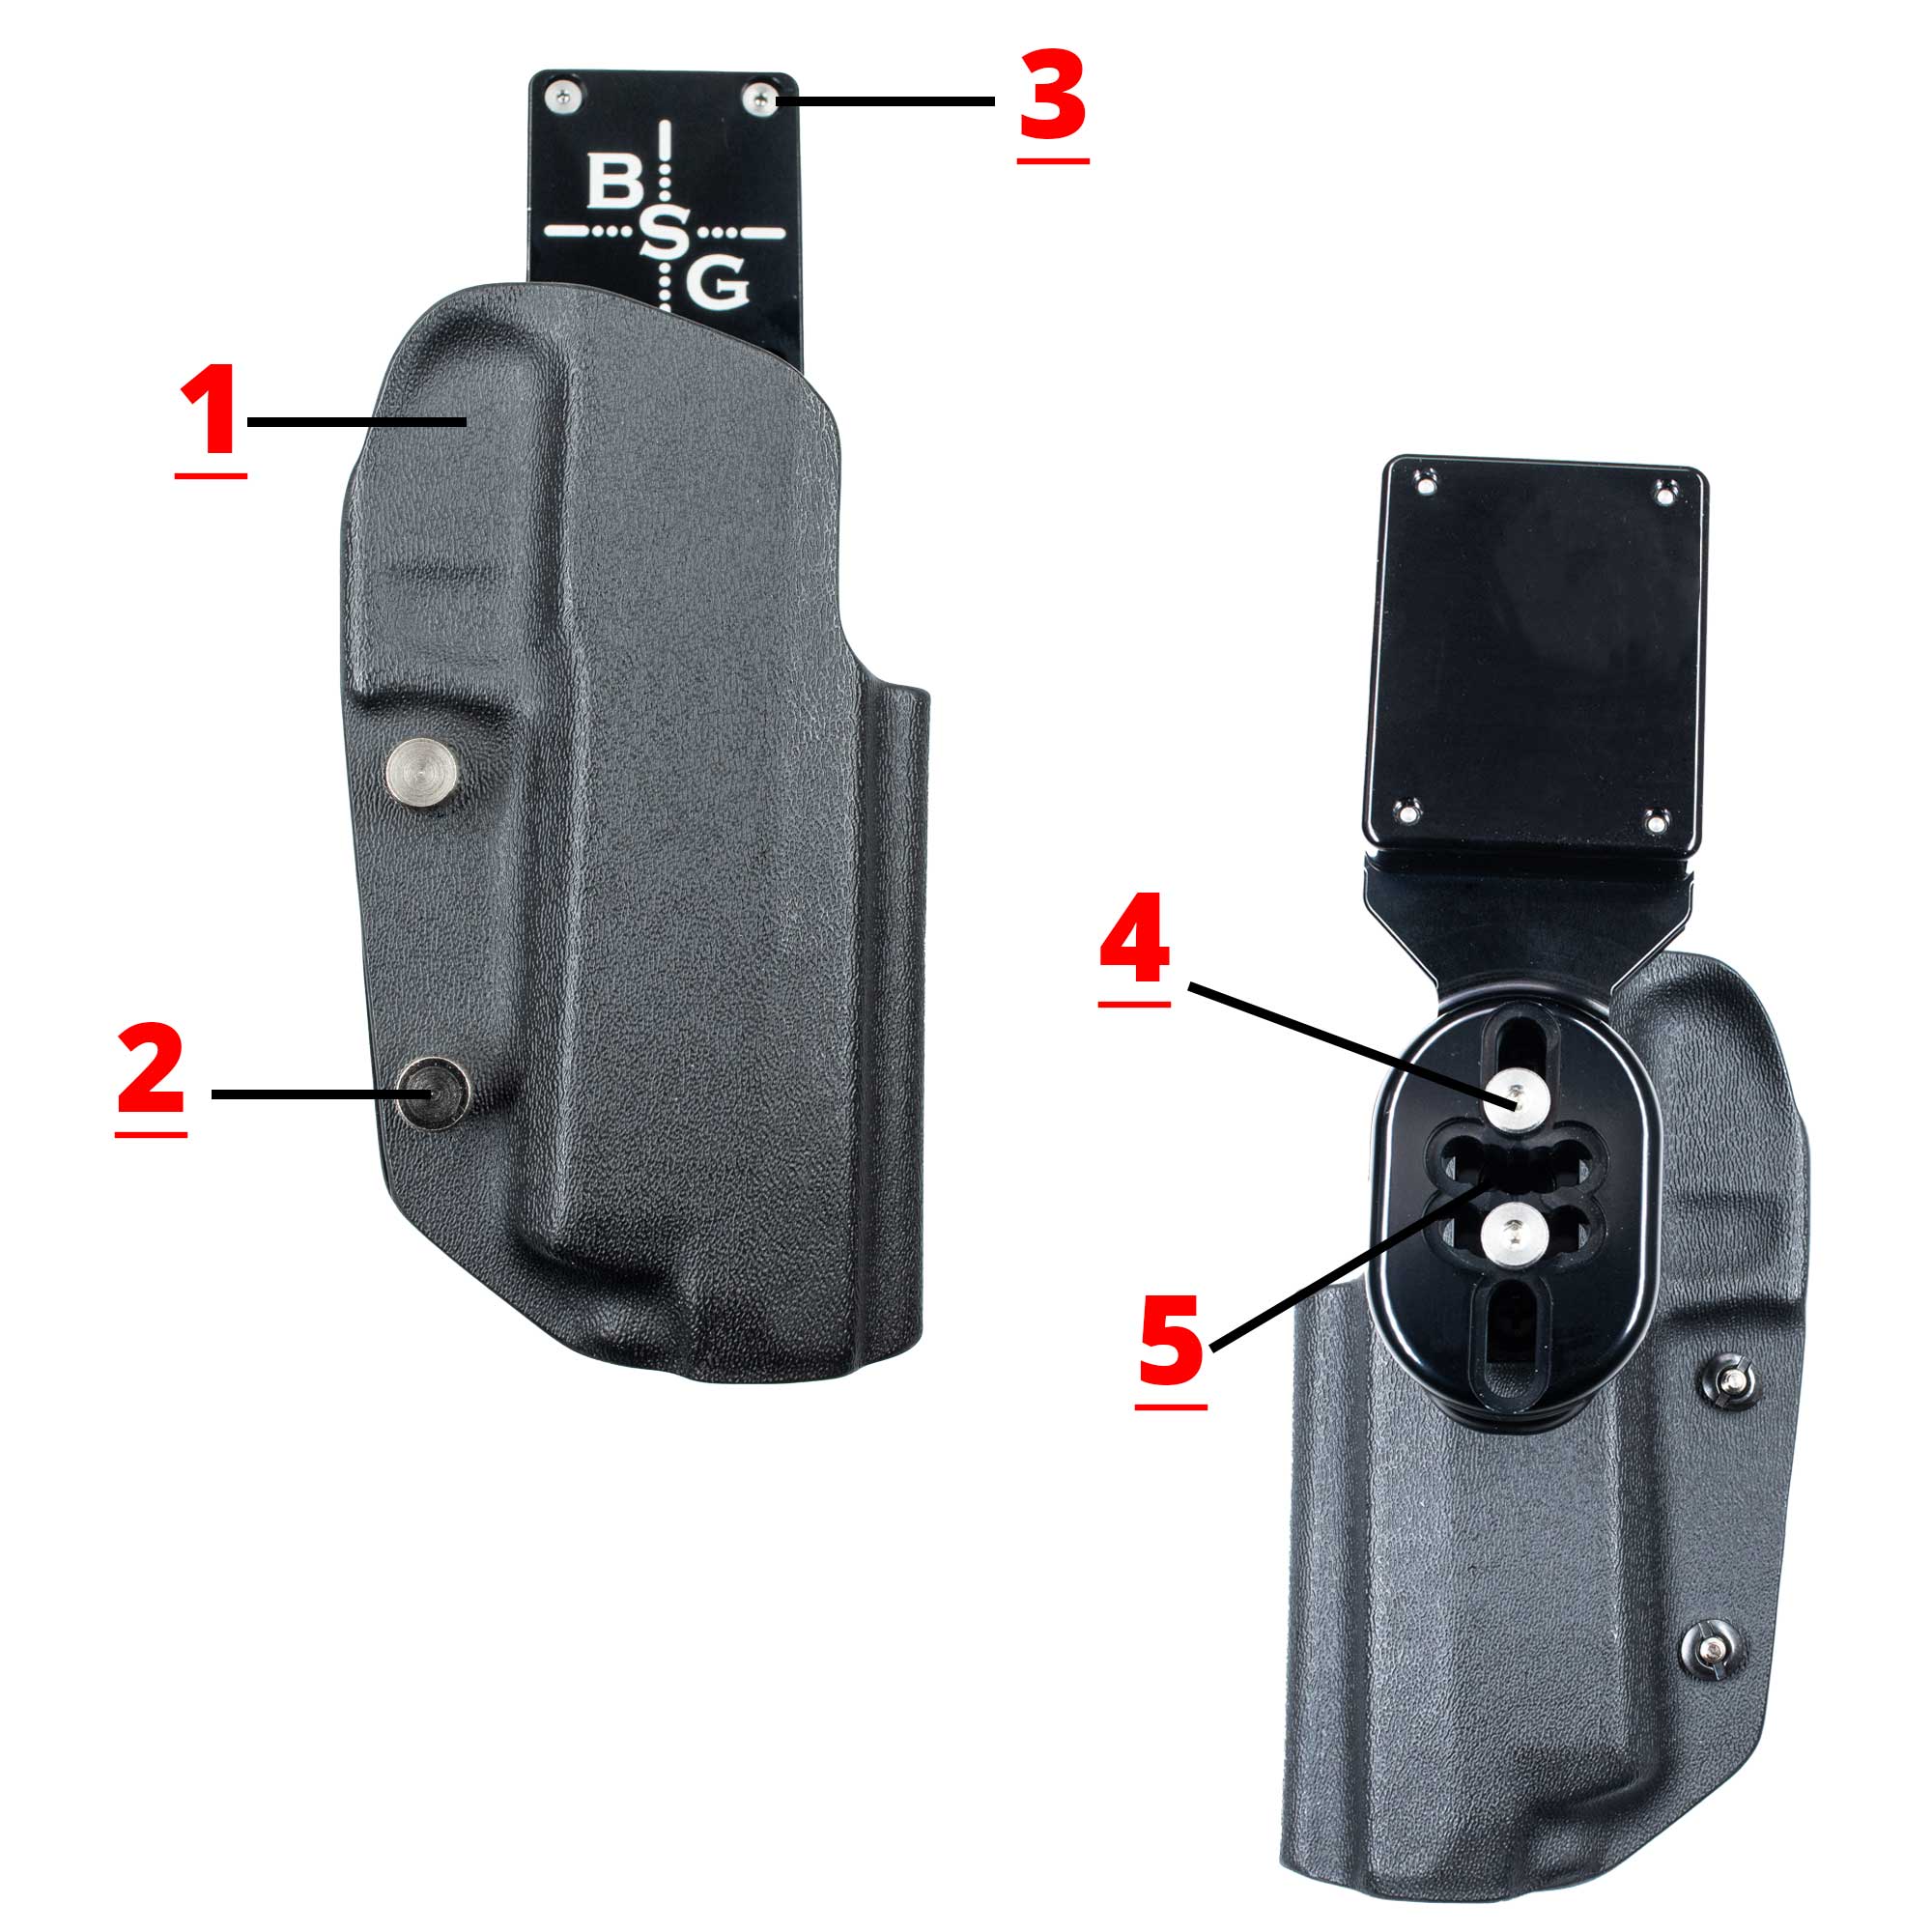 Pro Heavy Duty Holster Hardware Replacement Kits